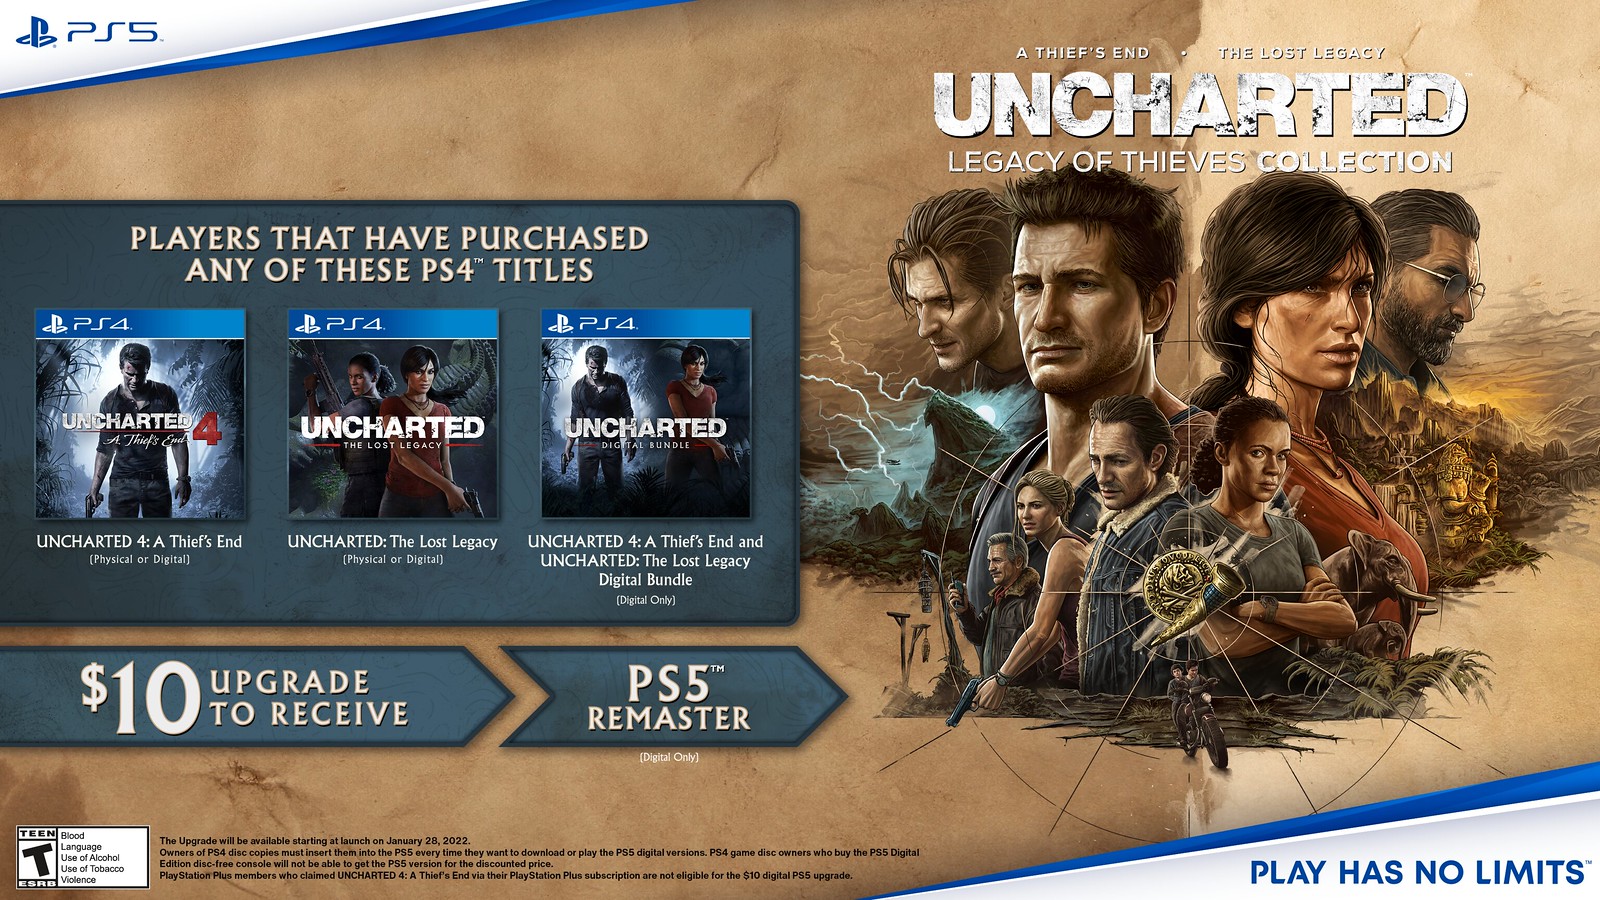 Uncharted movie release date, trailer and latest news